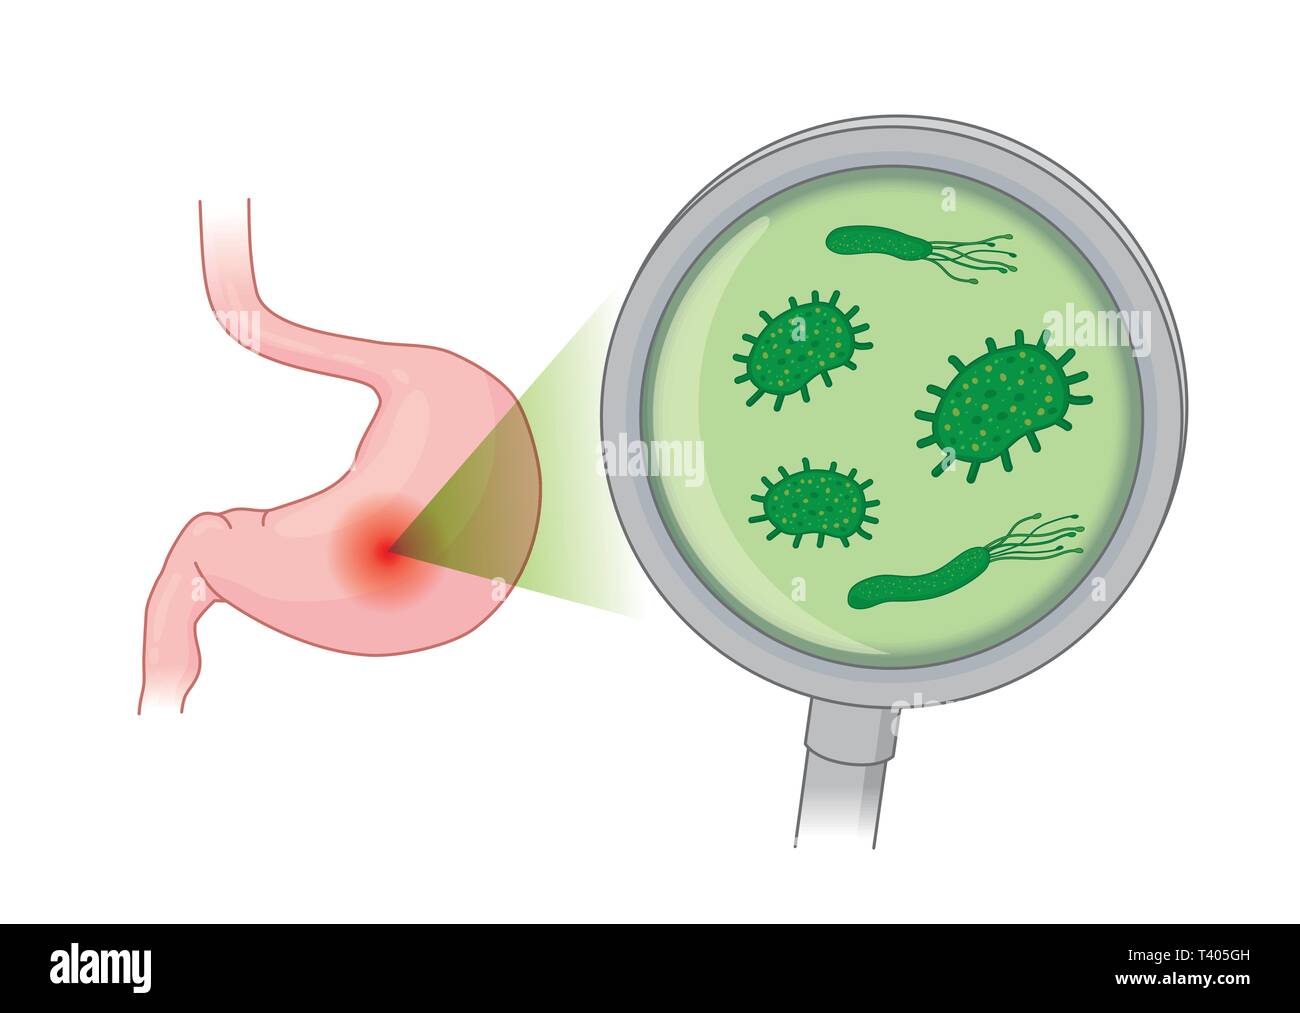 Looking Bacterial in human stomach with with Magnifying glass. Stock Vector